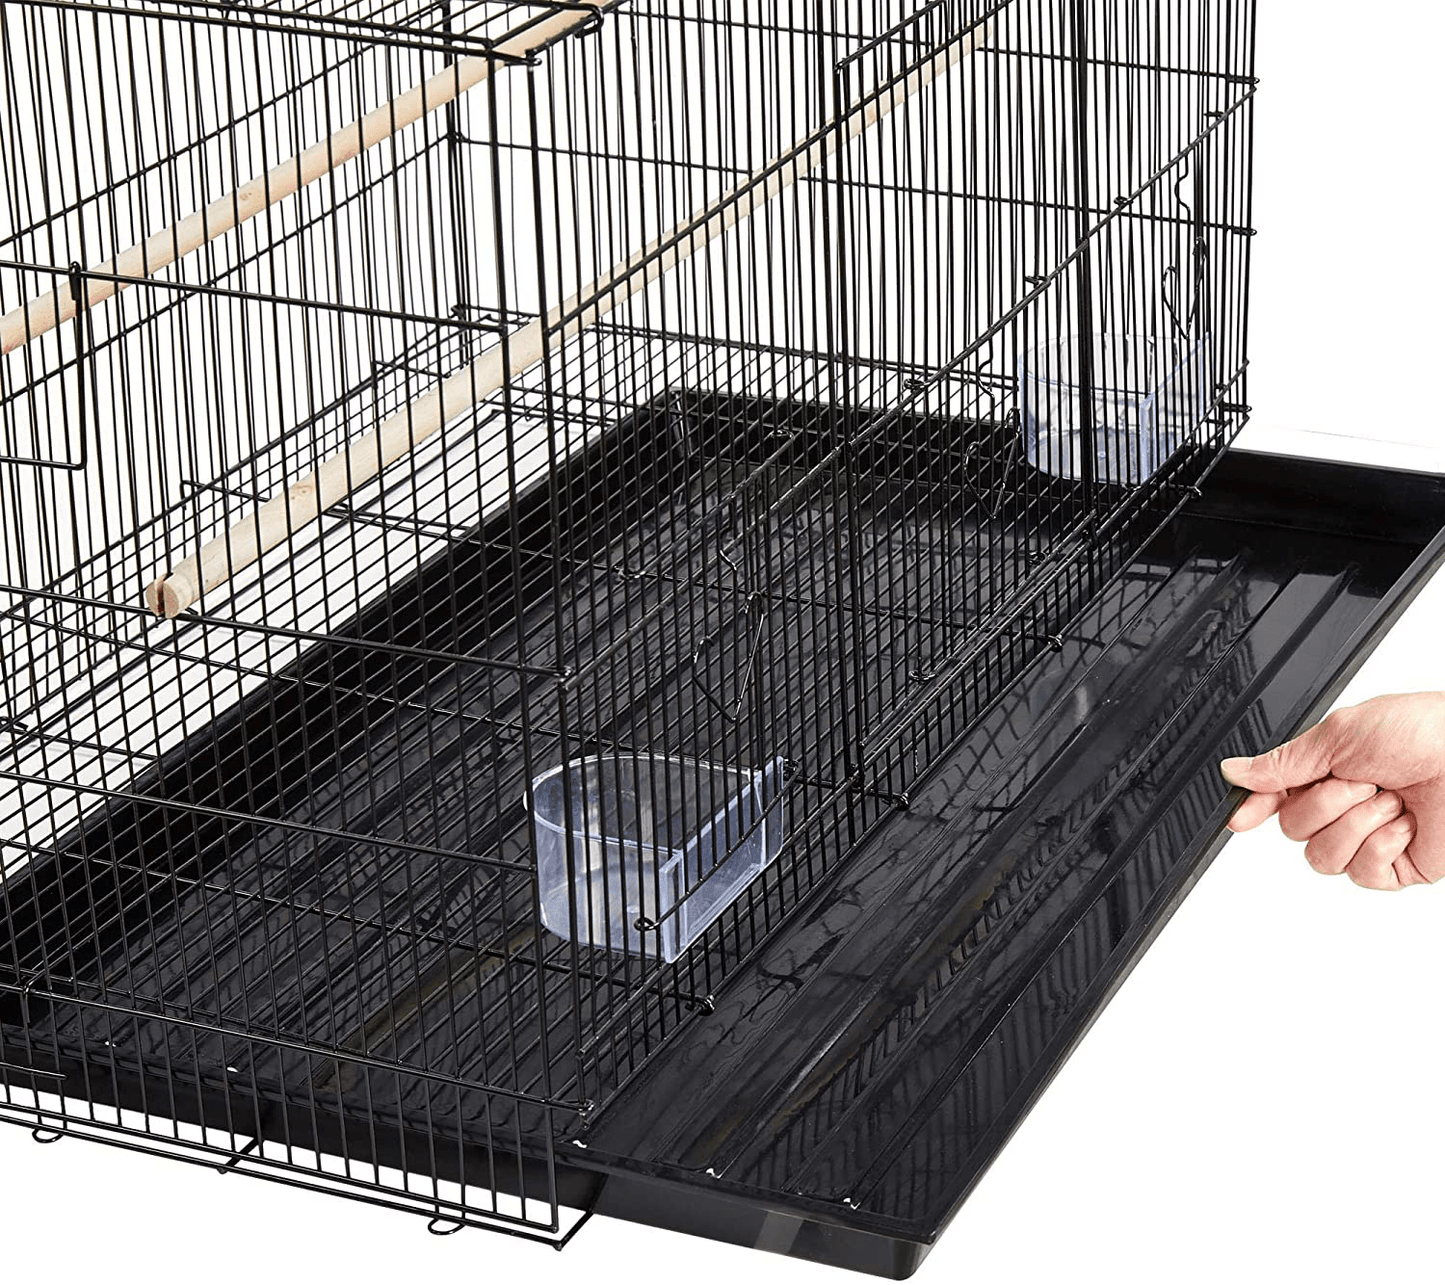 Yaheetech 30-Inch Rectangle Stackable Breeding Flight Parakeet Bird Cage for Finches Budgies Cockatiels Conures Lovebirds Canaries Parrots W/Slide-Out Tray, Black